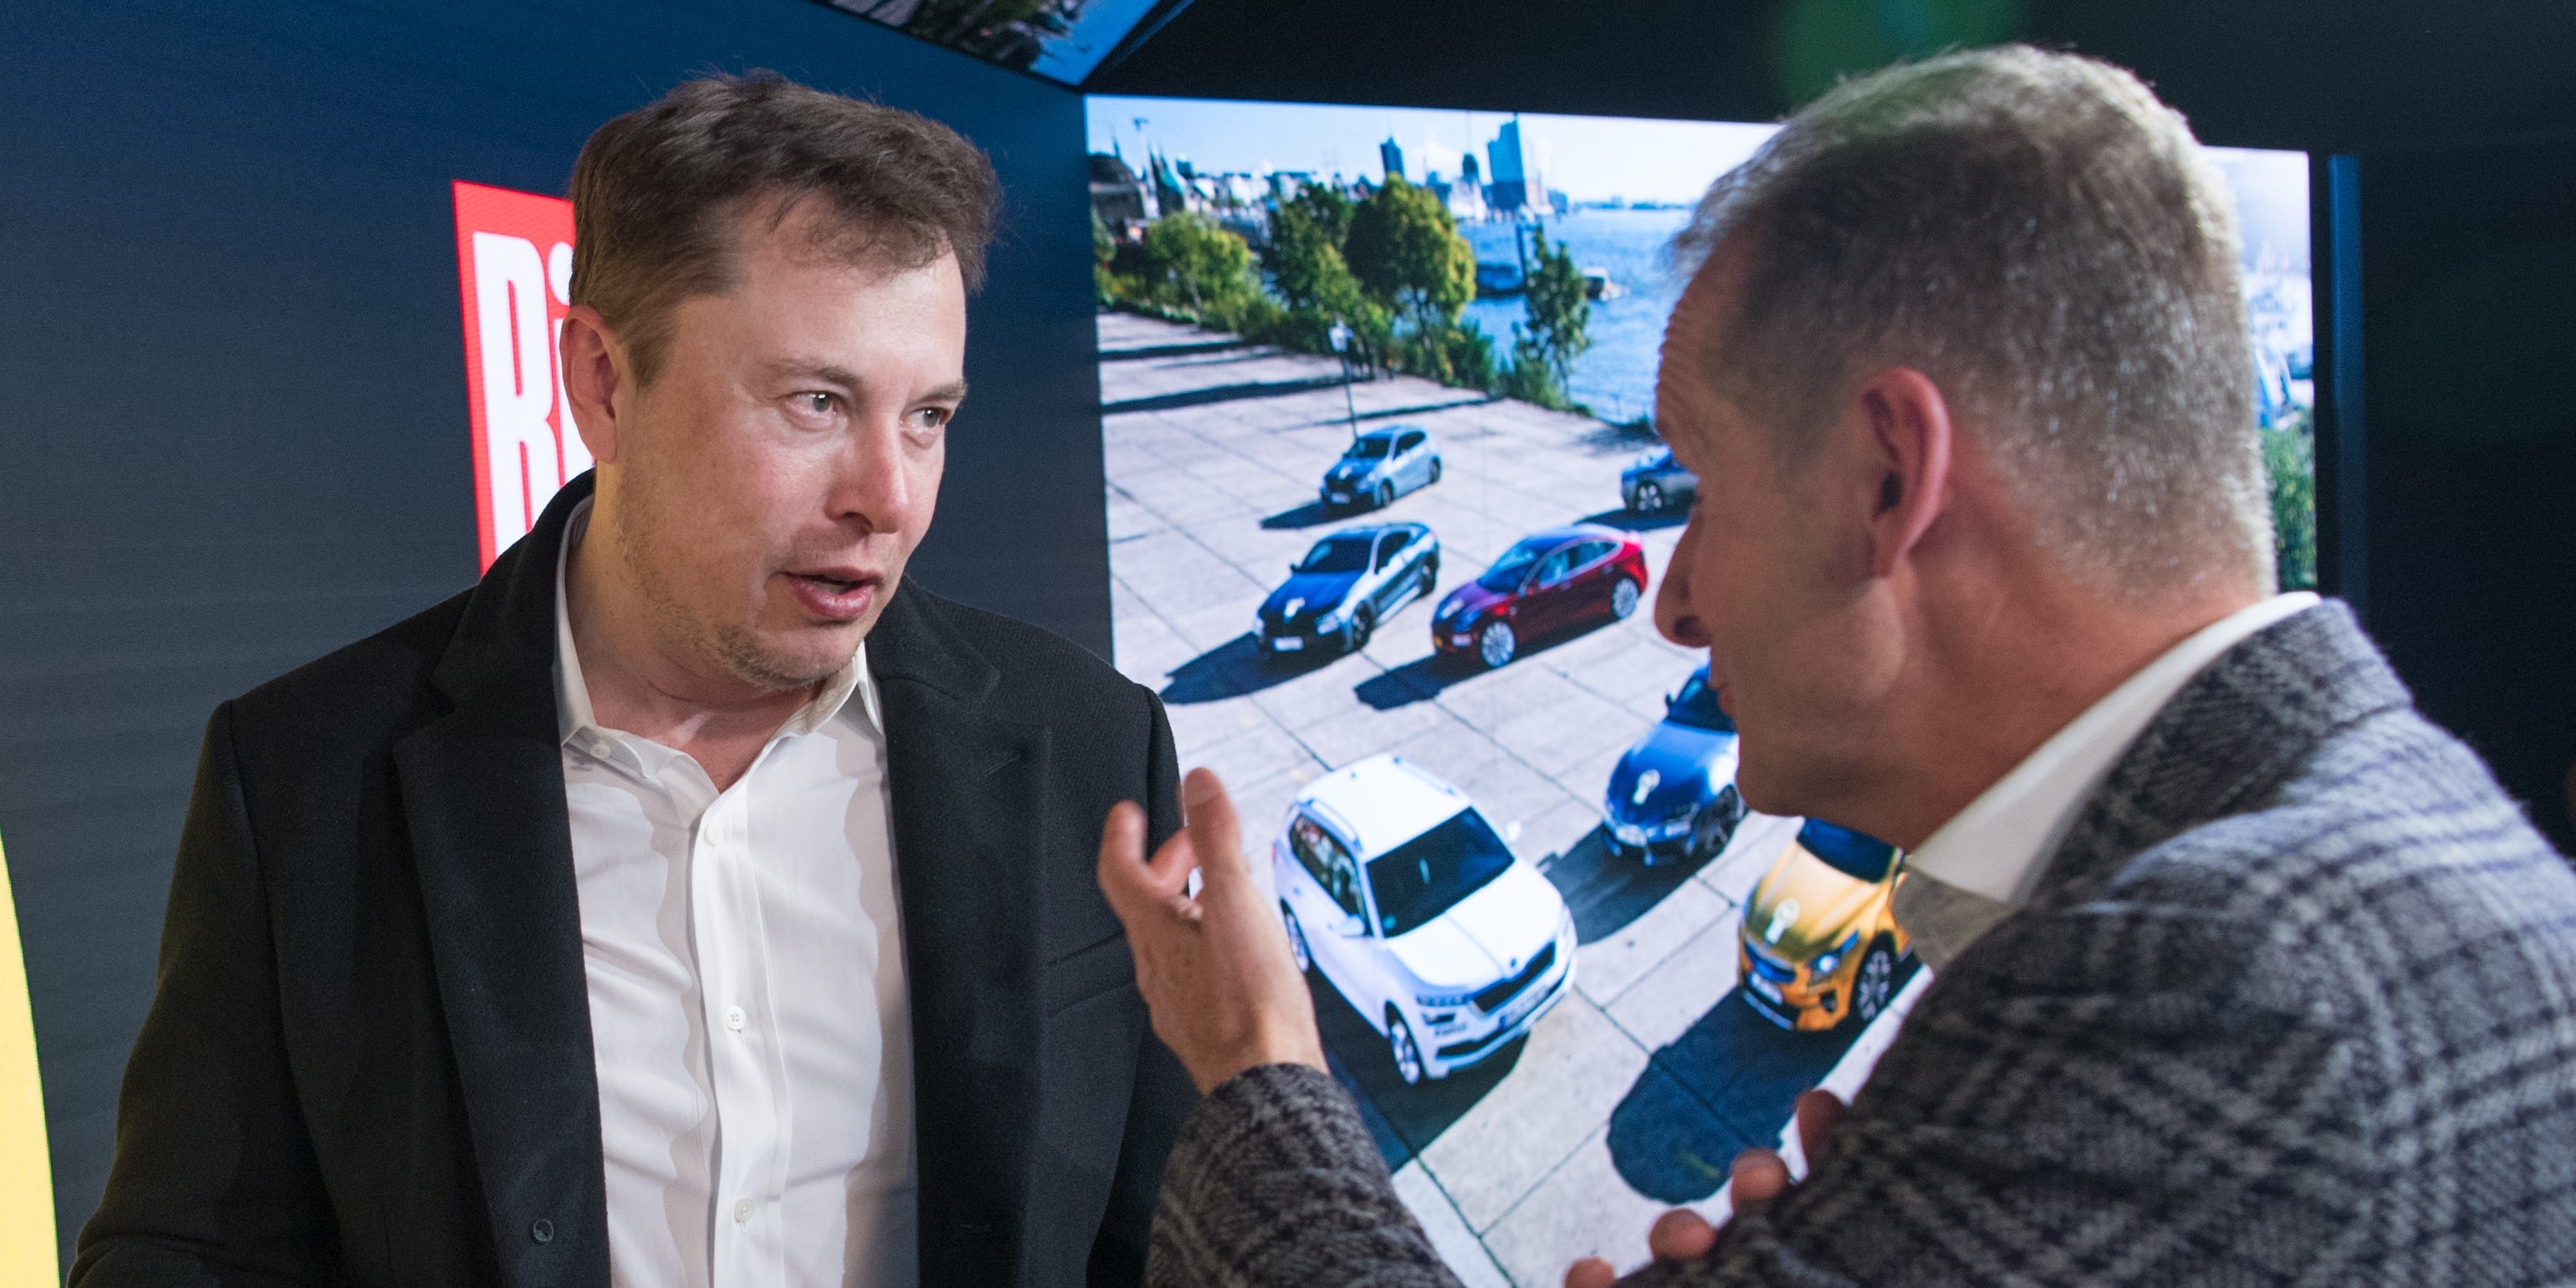 Elon Musk met with Volkswagen’s CEO while in Germany and test-drove its competing electric models